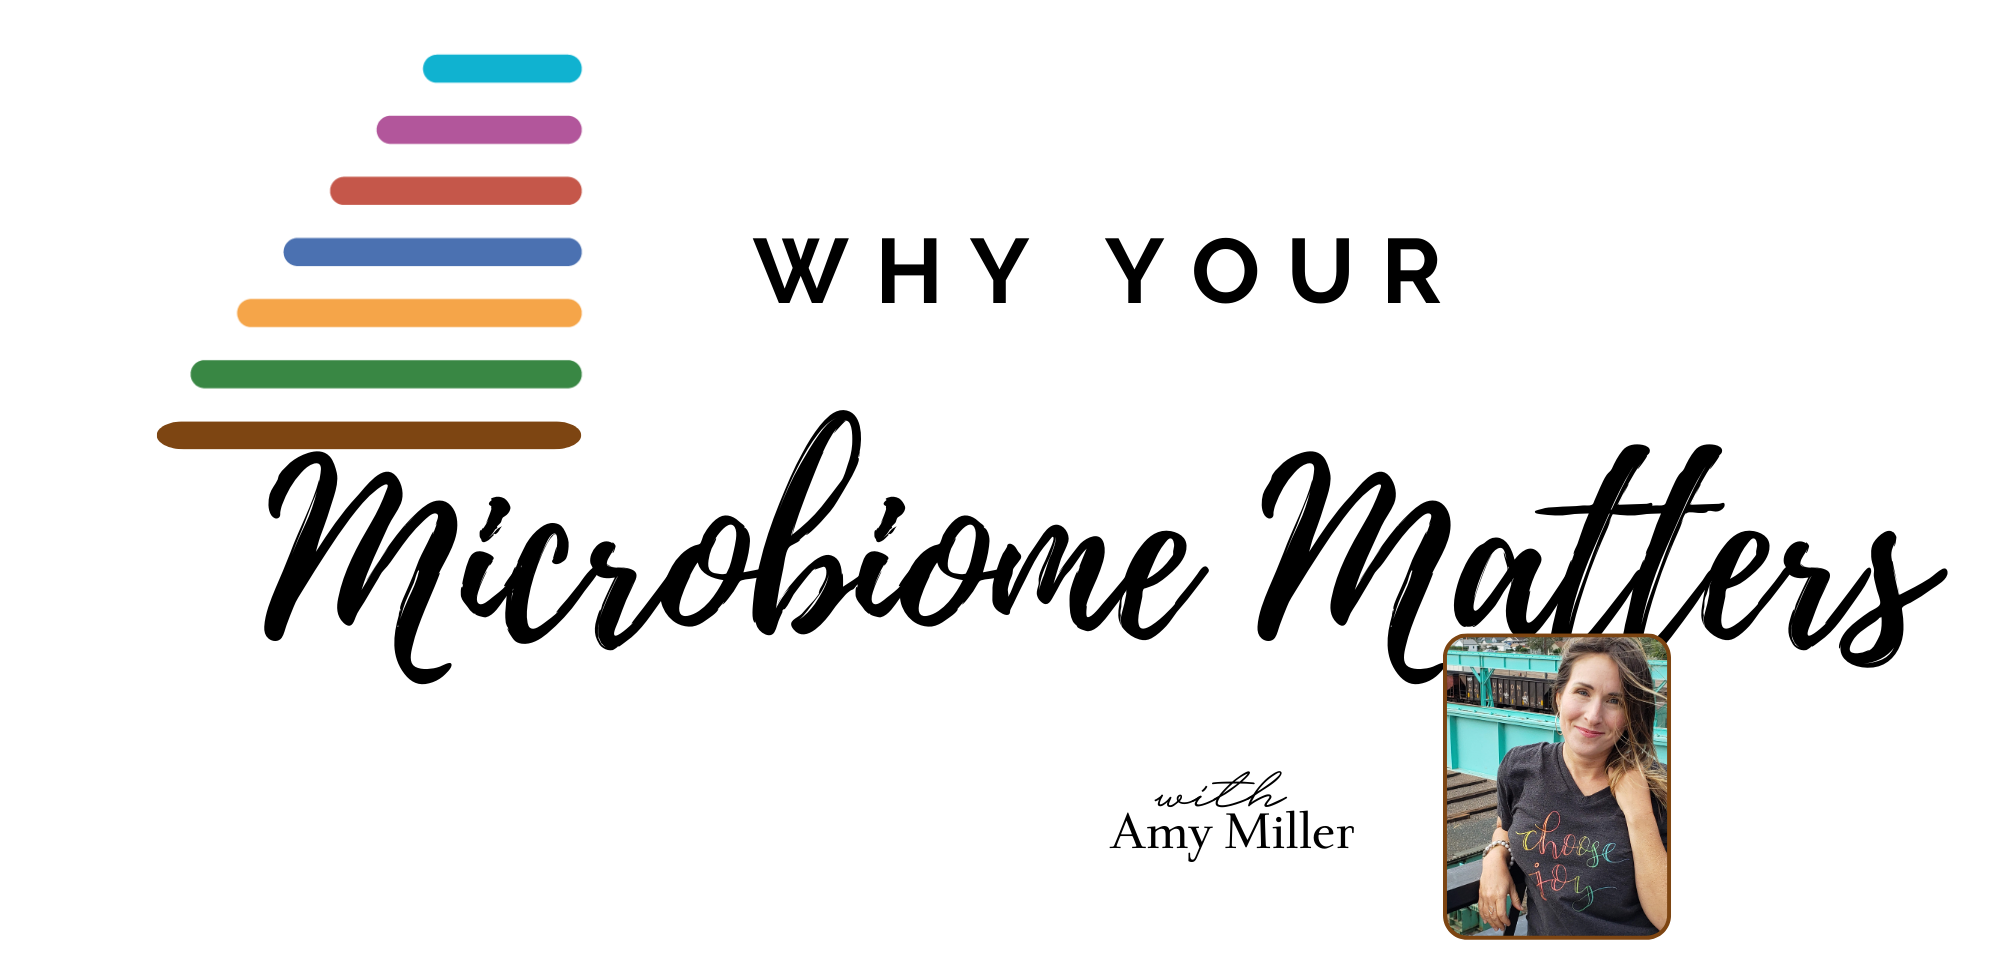 Why Your Microbiome Matters